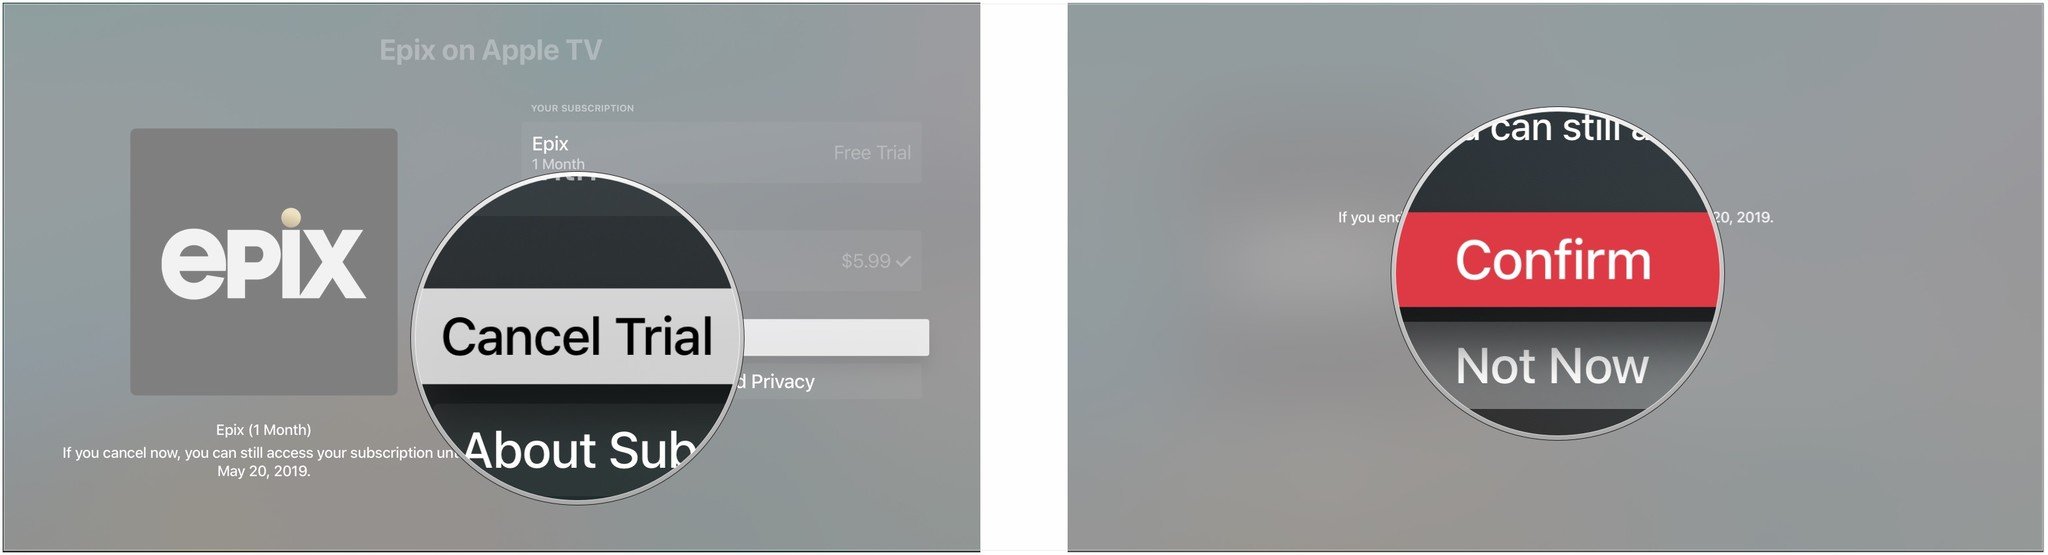 How to subscribe to Channels in the TV app on Apple TV | iMore